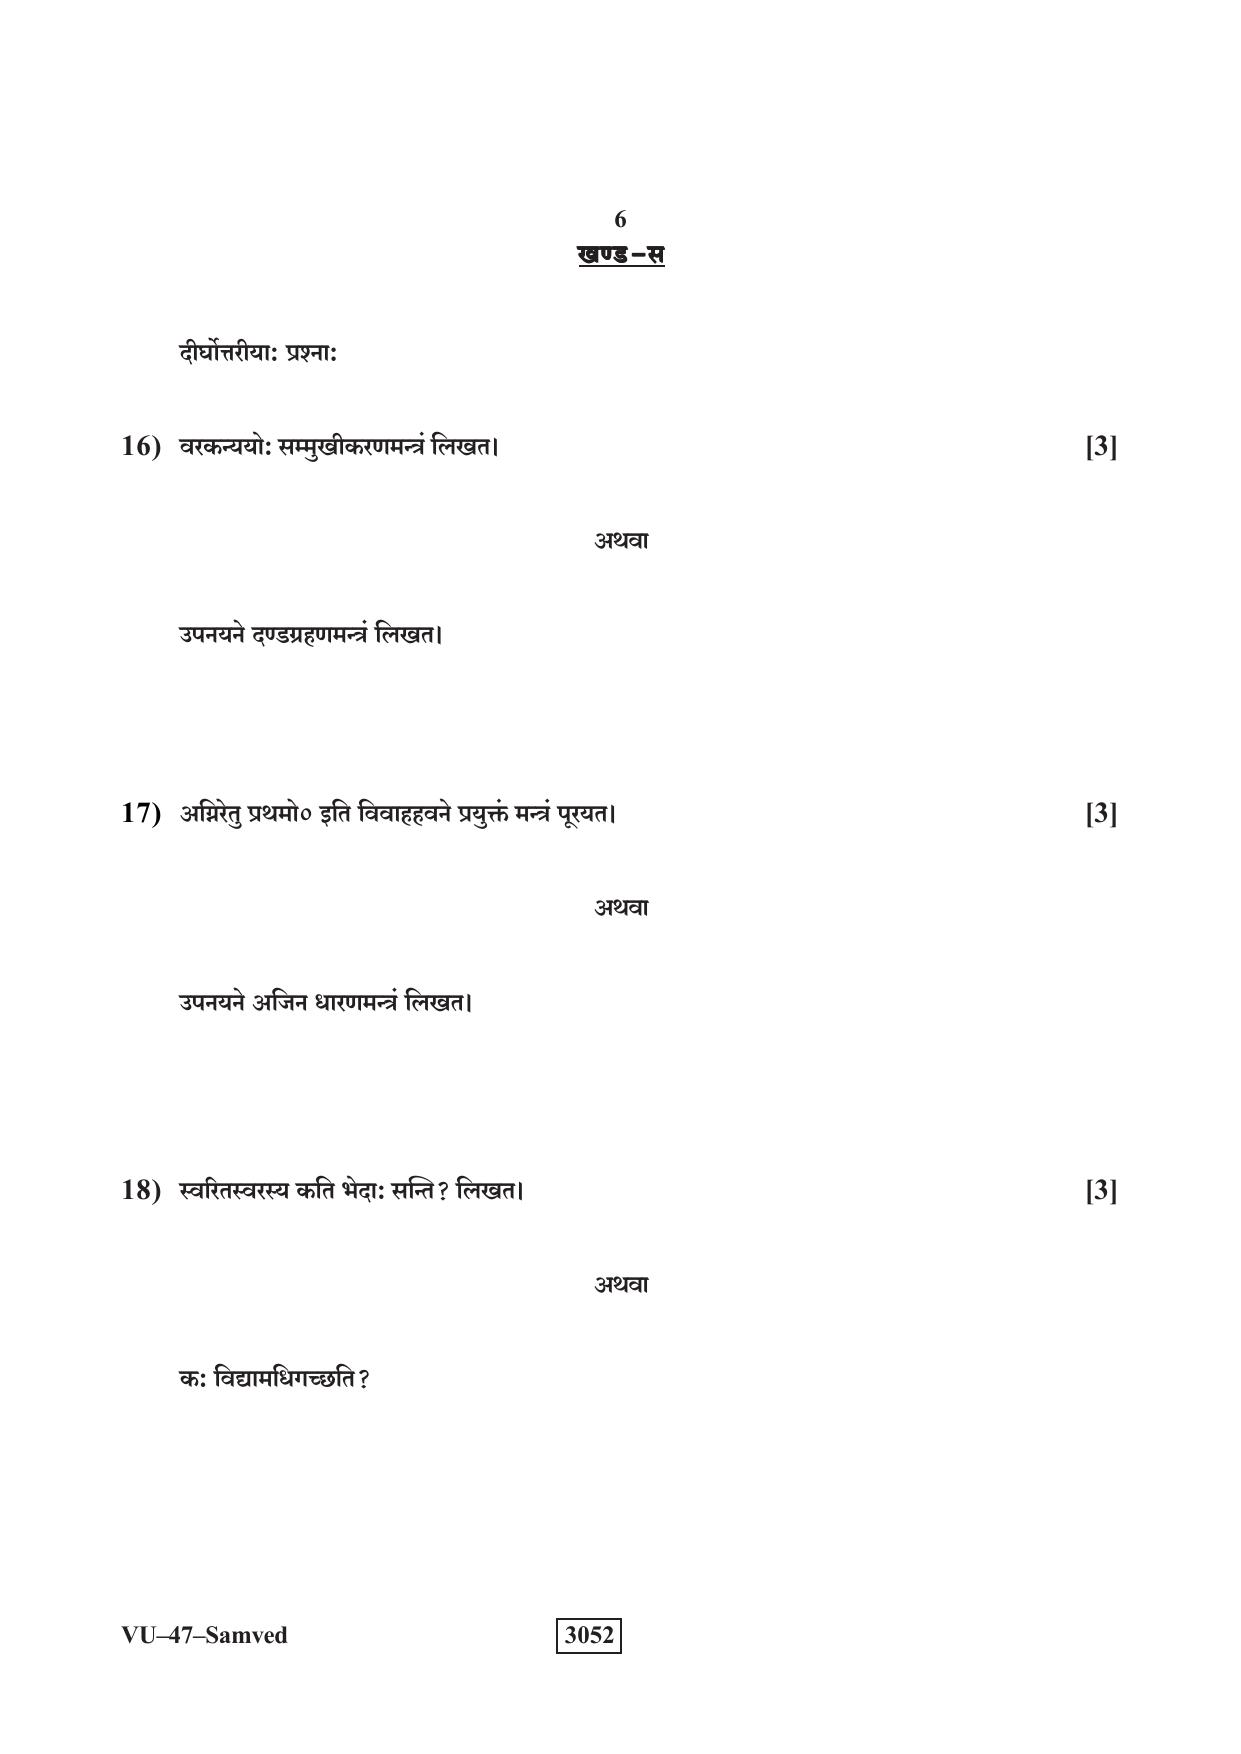 RBSE 2023 Samved Varishtha Upadhyay Question Paper - Page 6